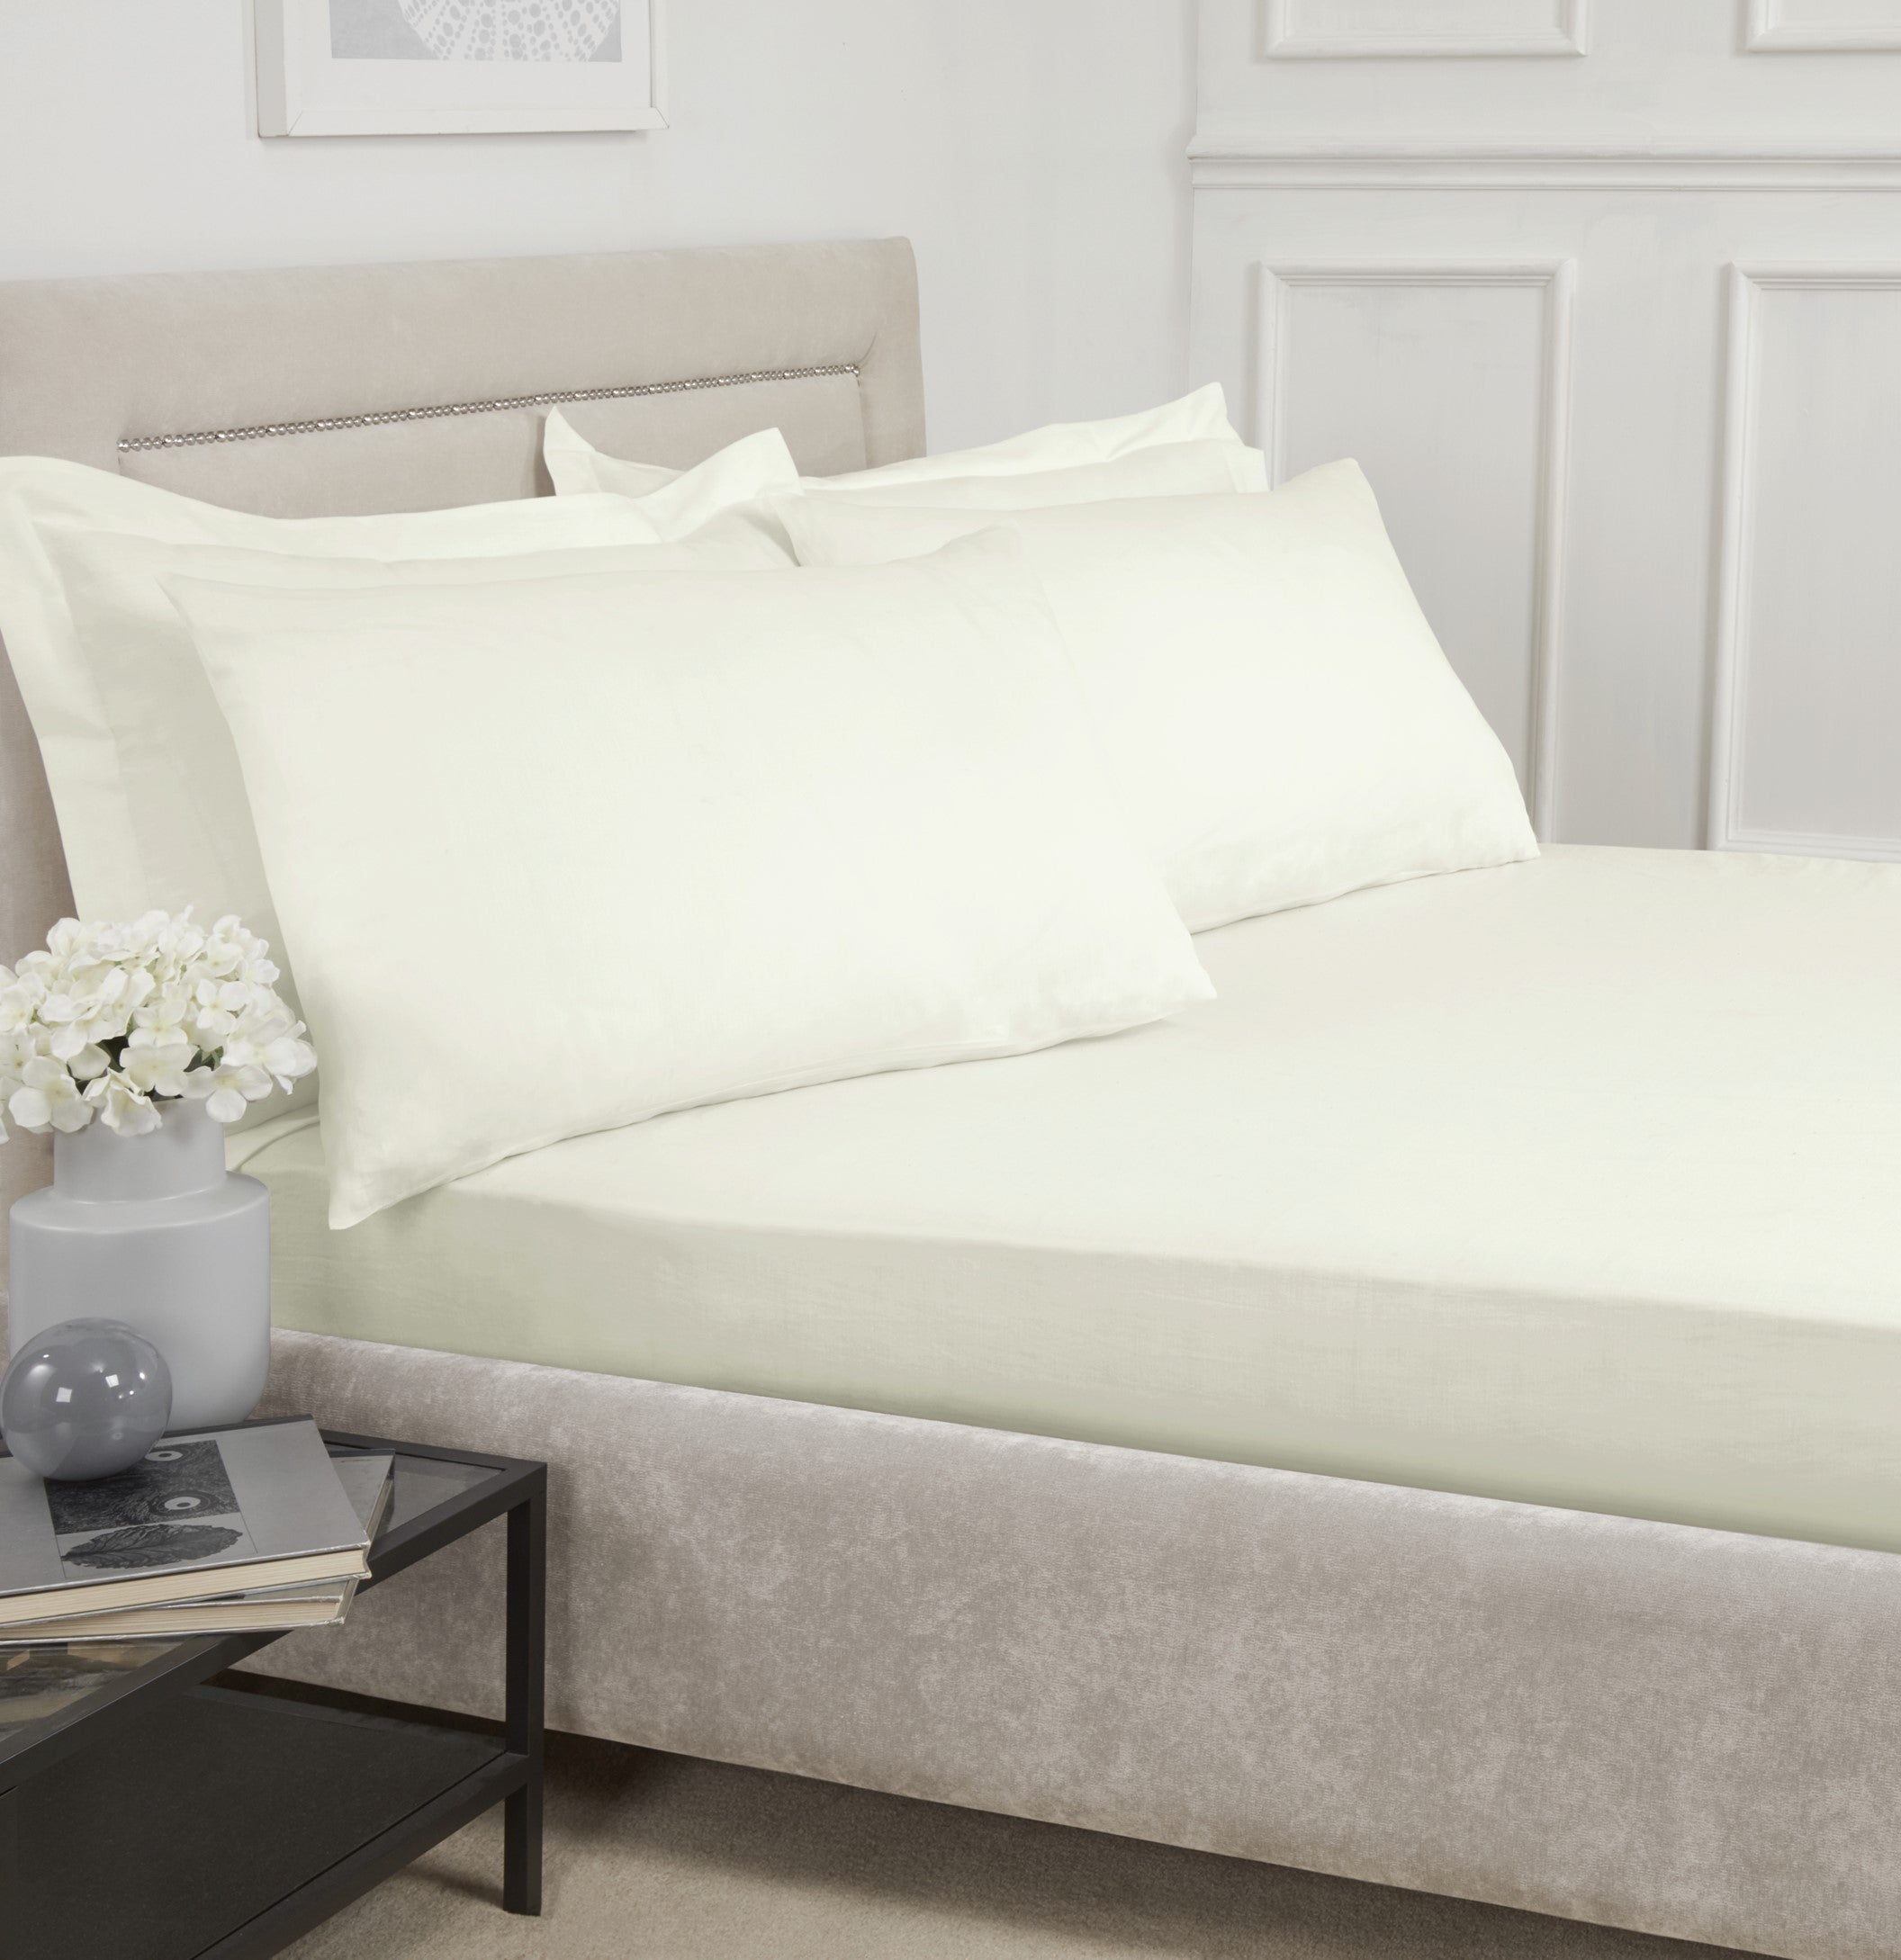 Lewis’s 100% Cotton Fitted Bedding Range - Cream - Single Fitted Sheet  | TJ Hughes